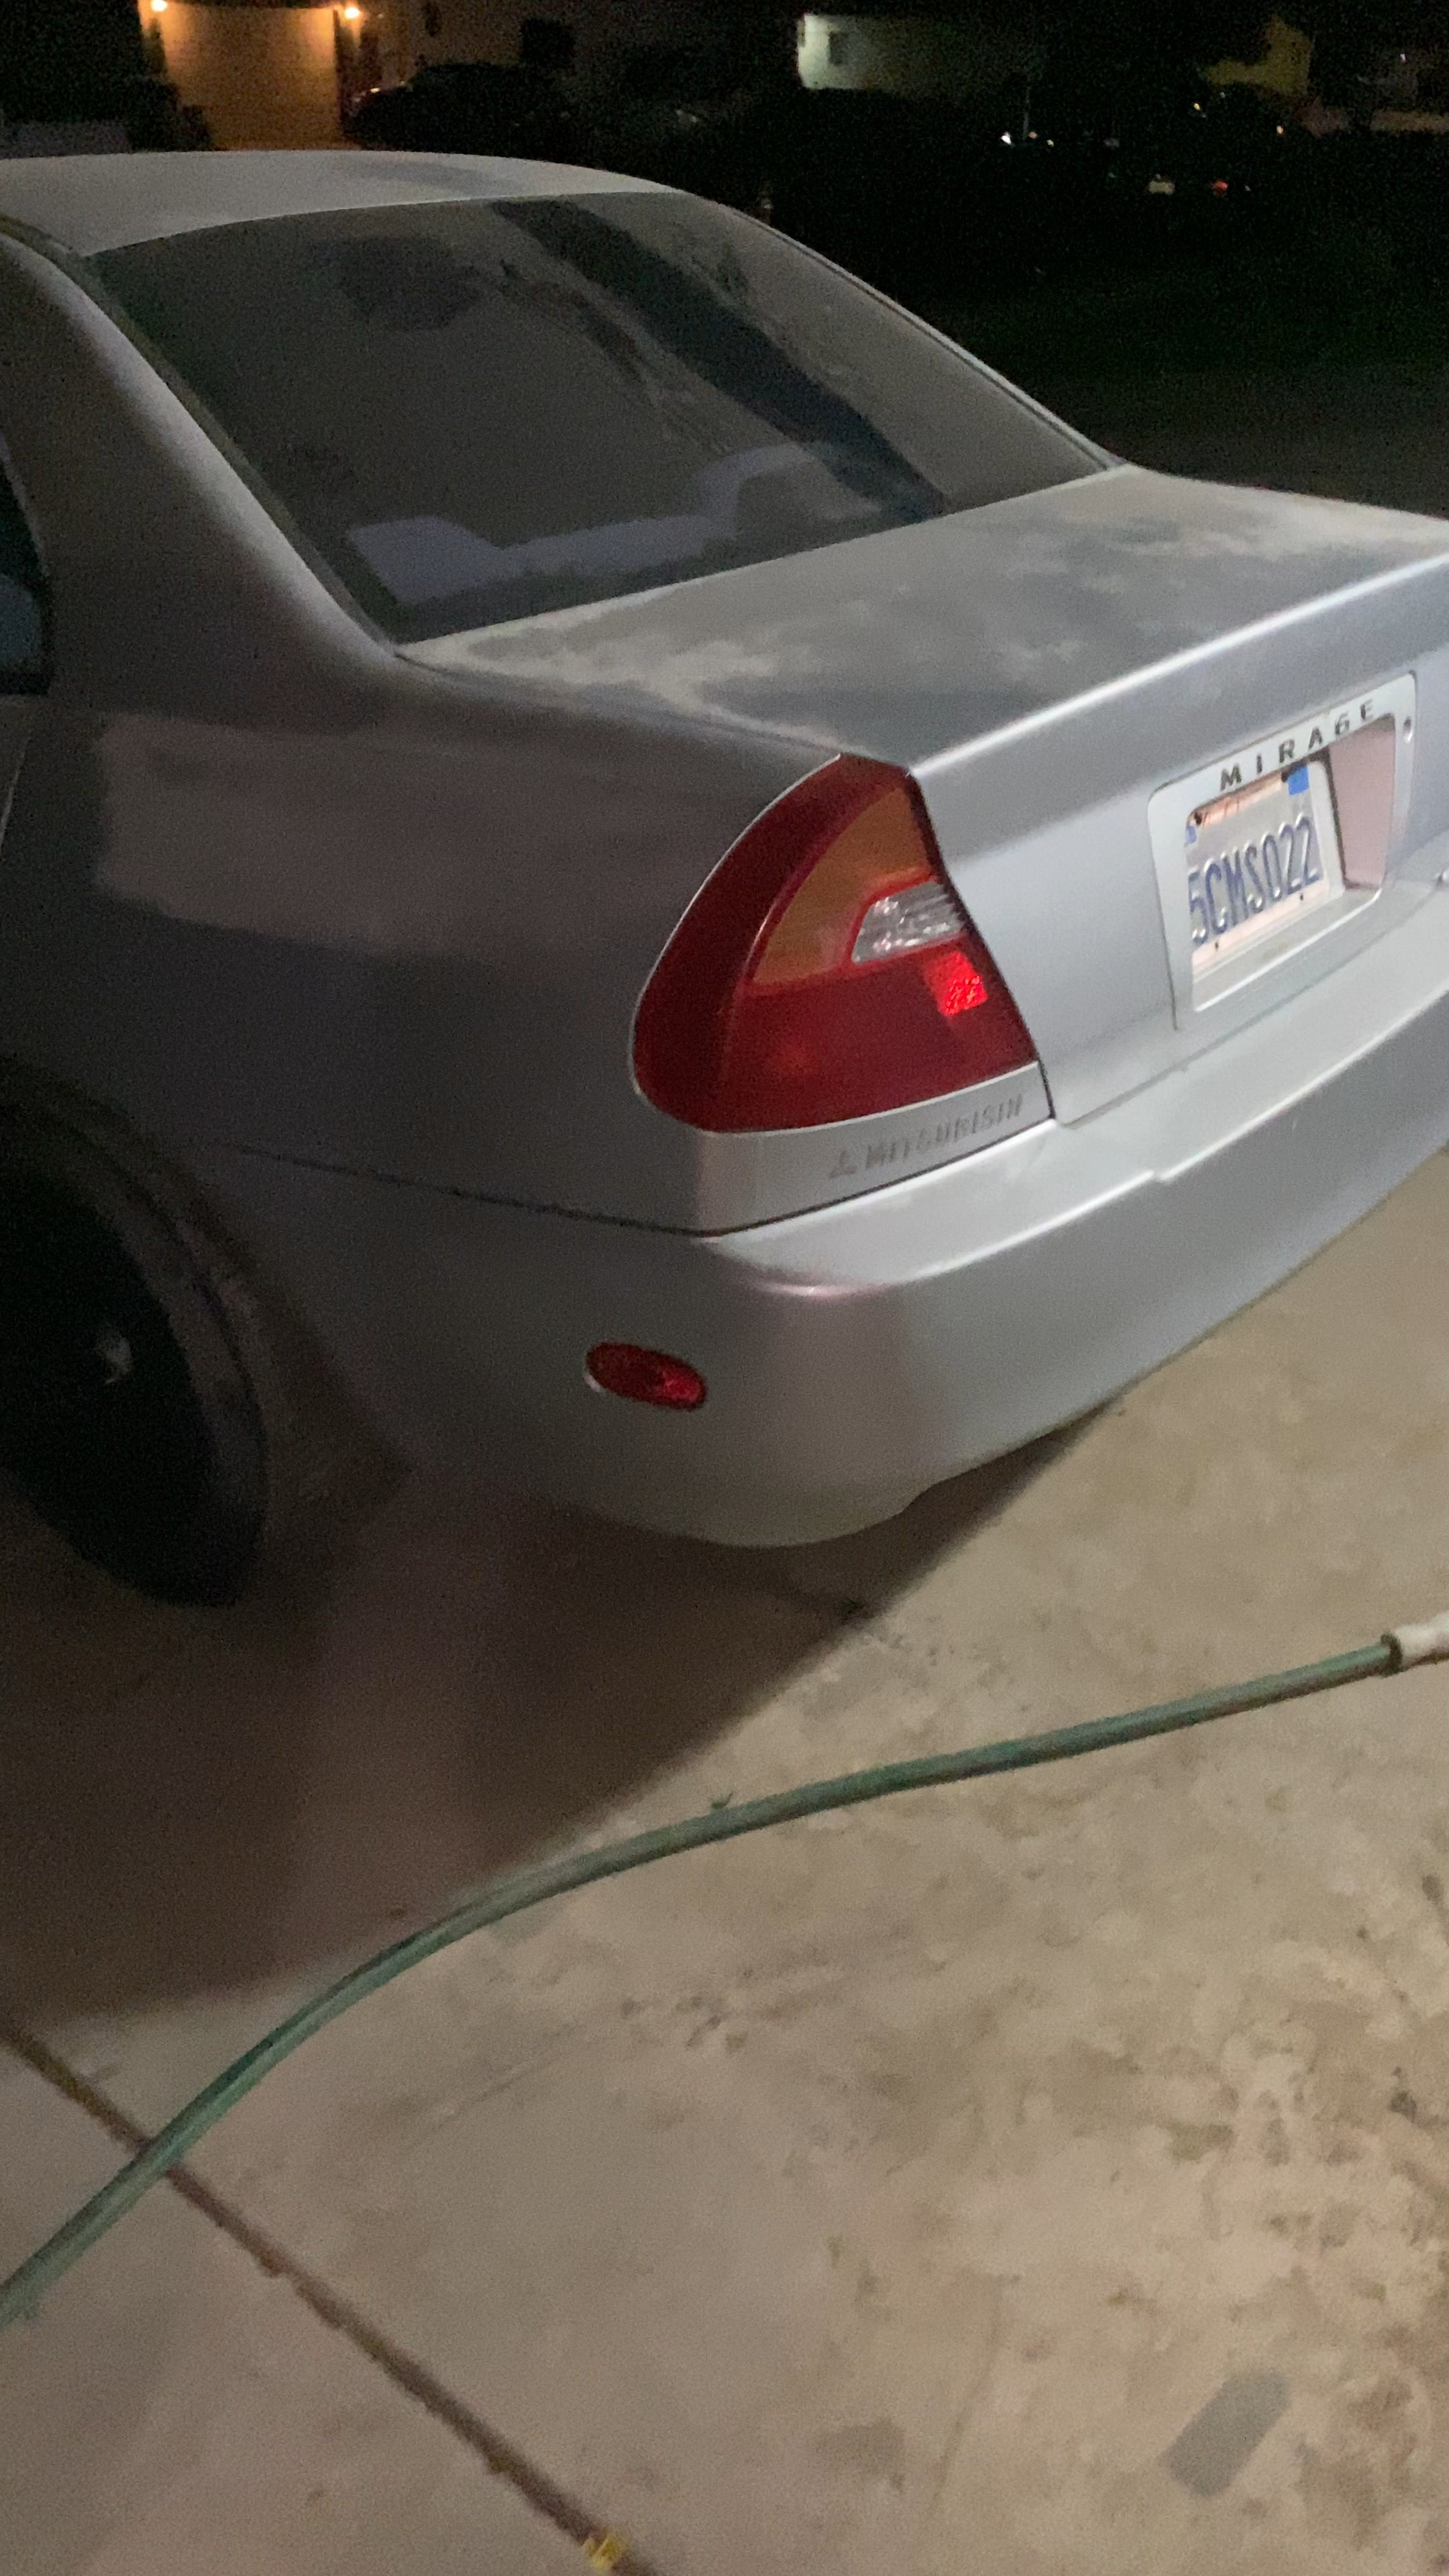 Heres my 2001 Mitsubishi Mirage ES, it's the 5-speed manual, 1.8L and has  power windows :D Nothing special but it's mine and I like it :) : r/ mitsubishi